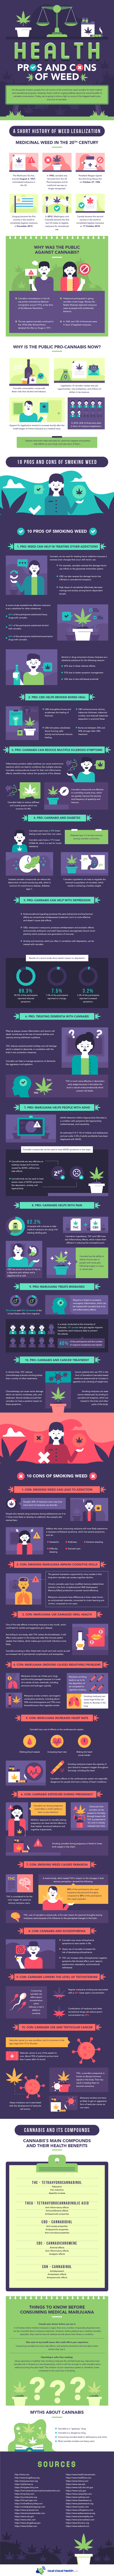 Health Pros and Cons of Weed (Infographic)